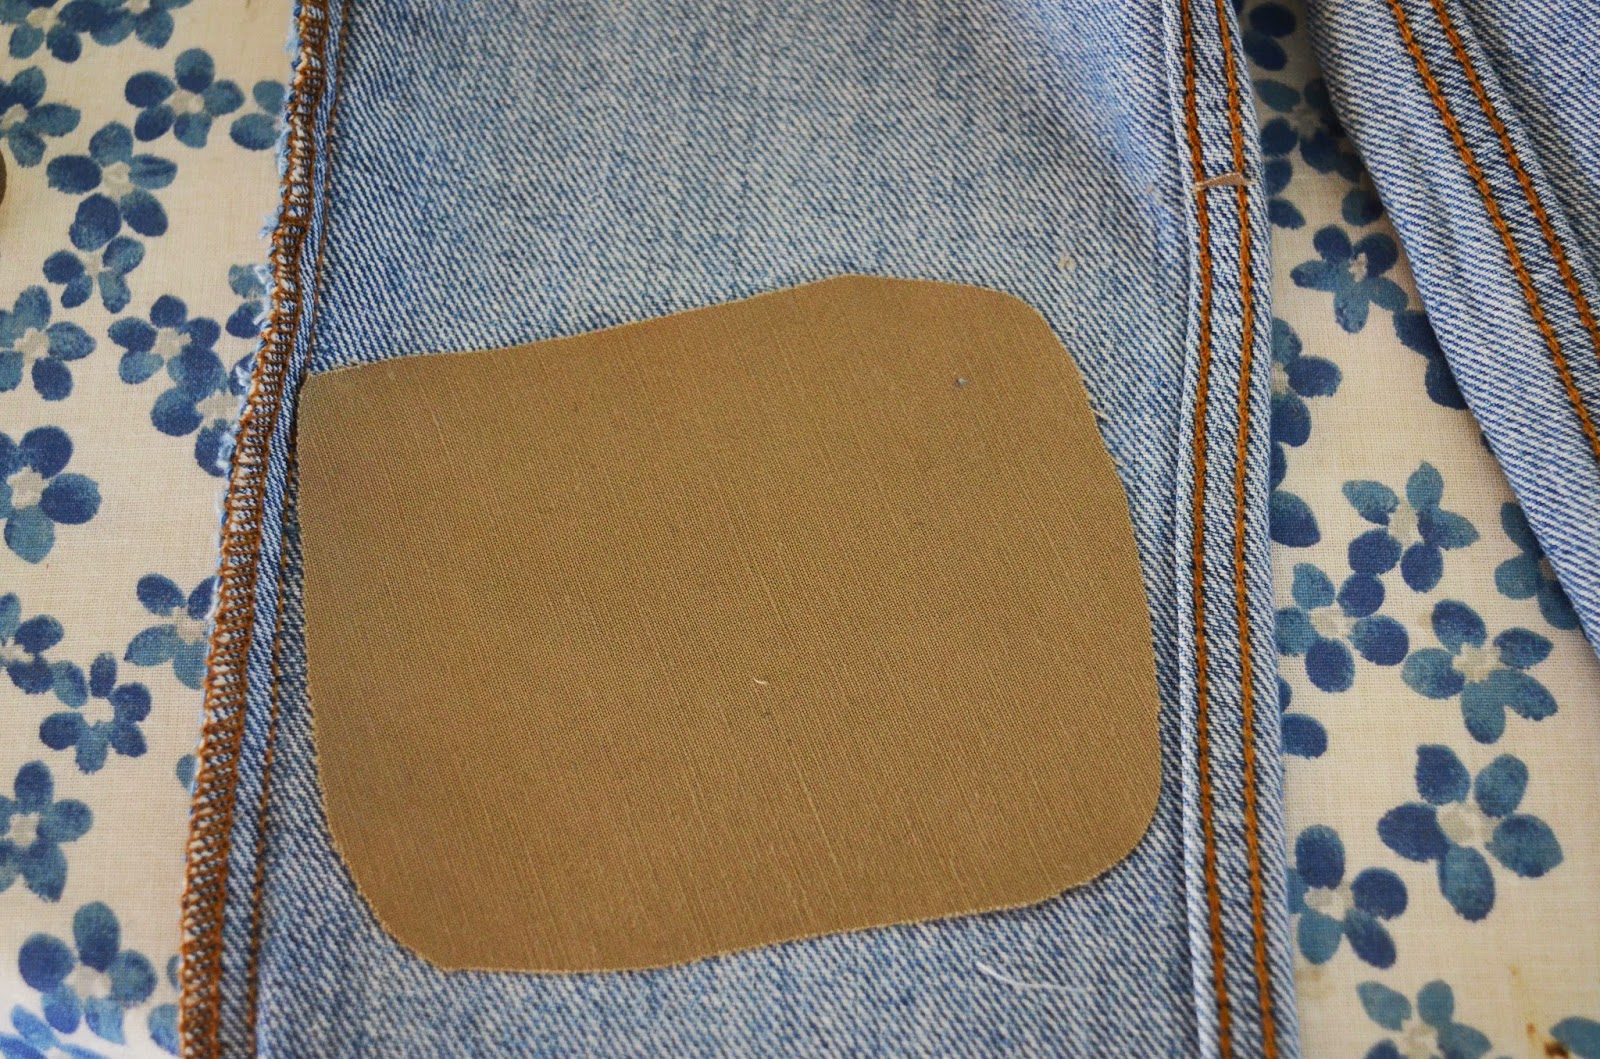  4 Pack Backing Patches - Super Strong Iron on Denim